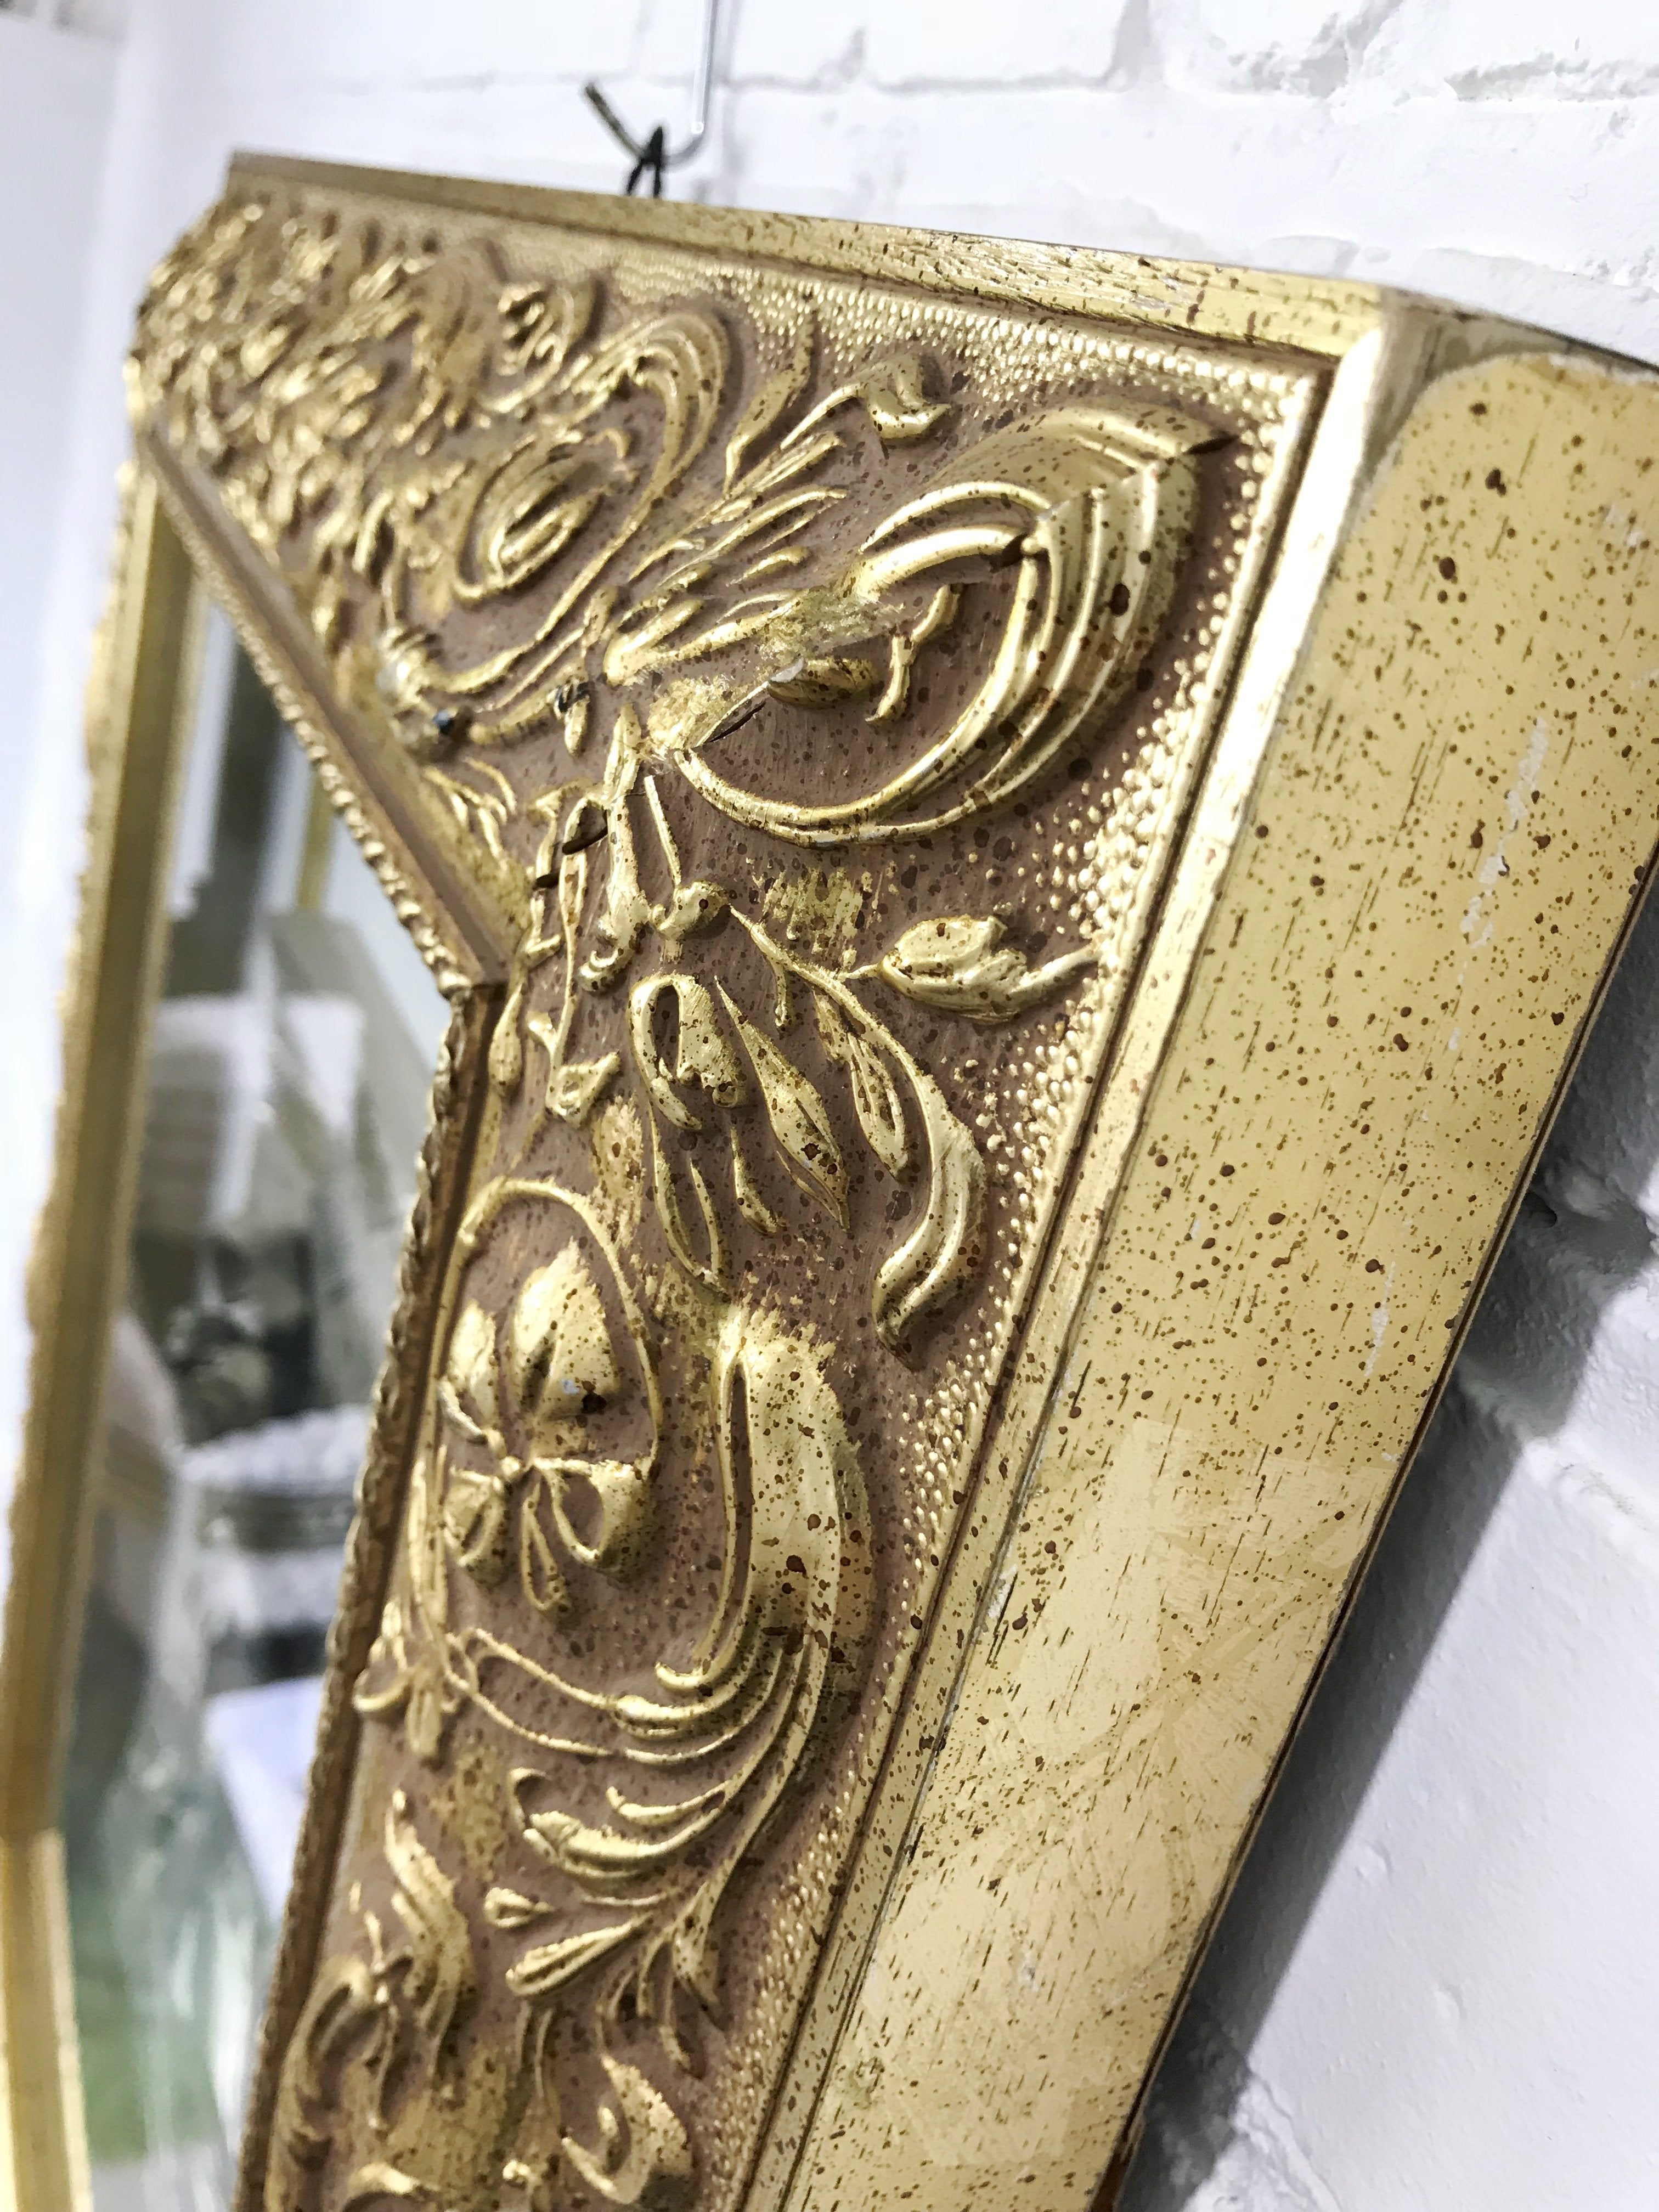 Ornate Gold Argenti Picture Frame | eXibit collection